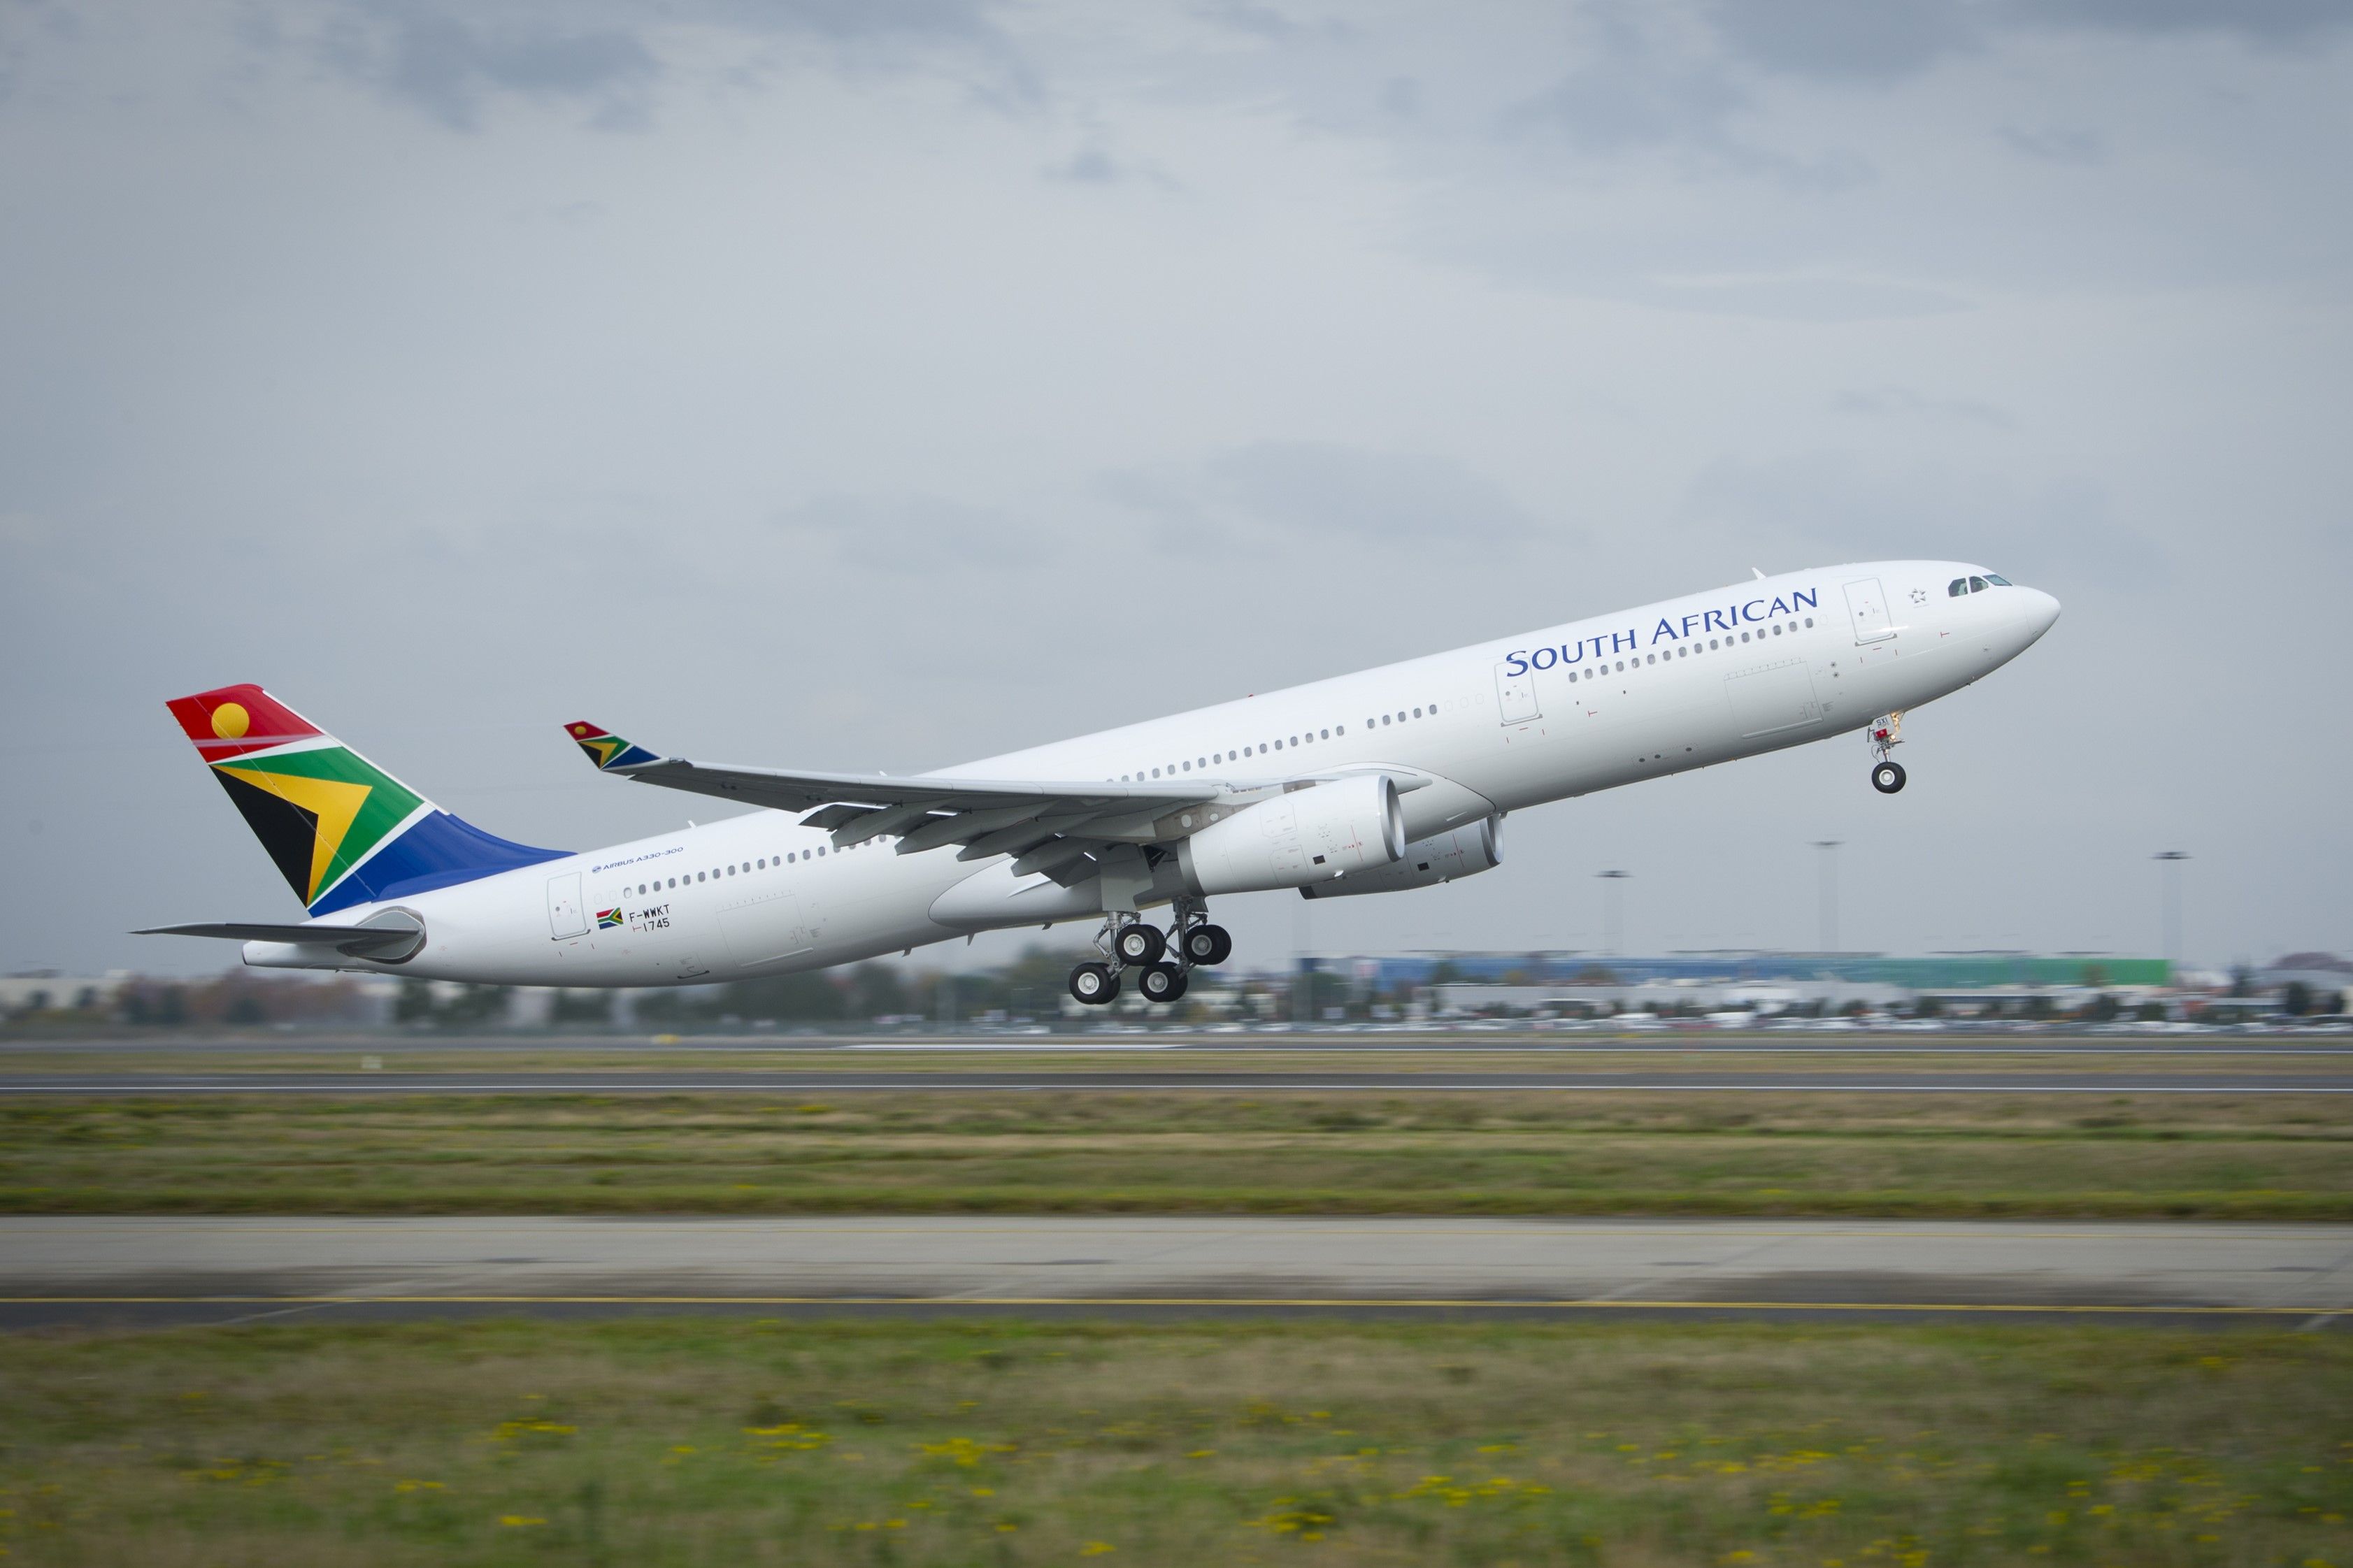 South African Airways Airbus A330 taking off